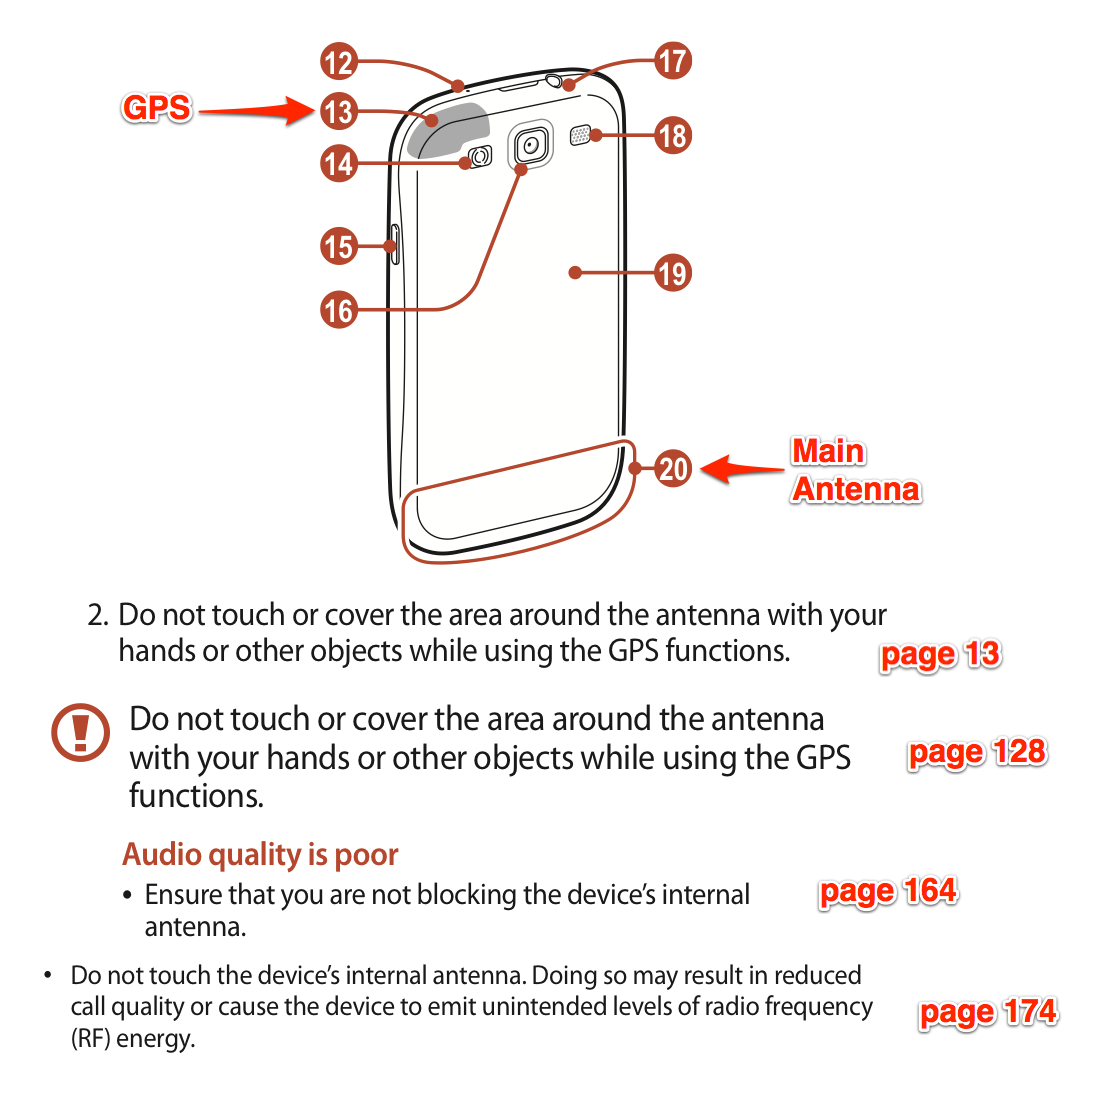 "You're holding it wrong:" Samsung documentation instructs you about the right way to hold the Galaxy S III